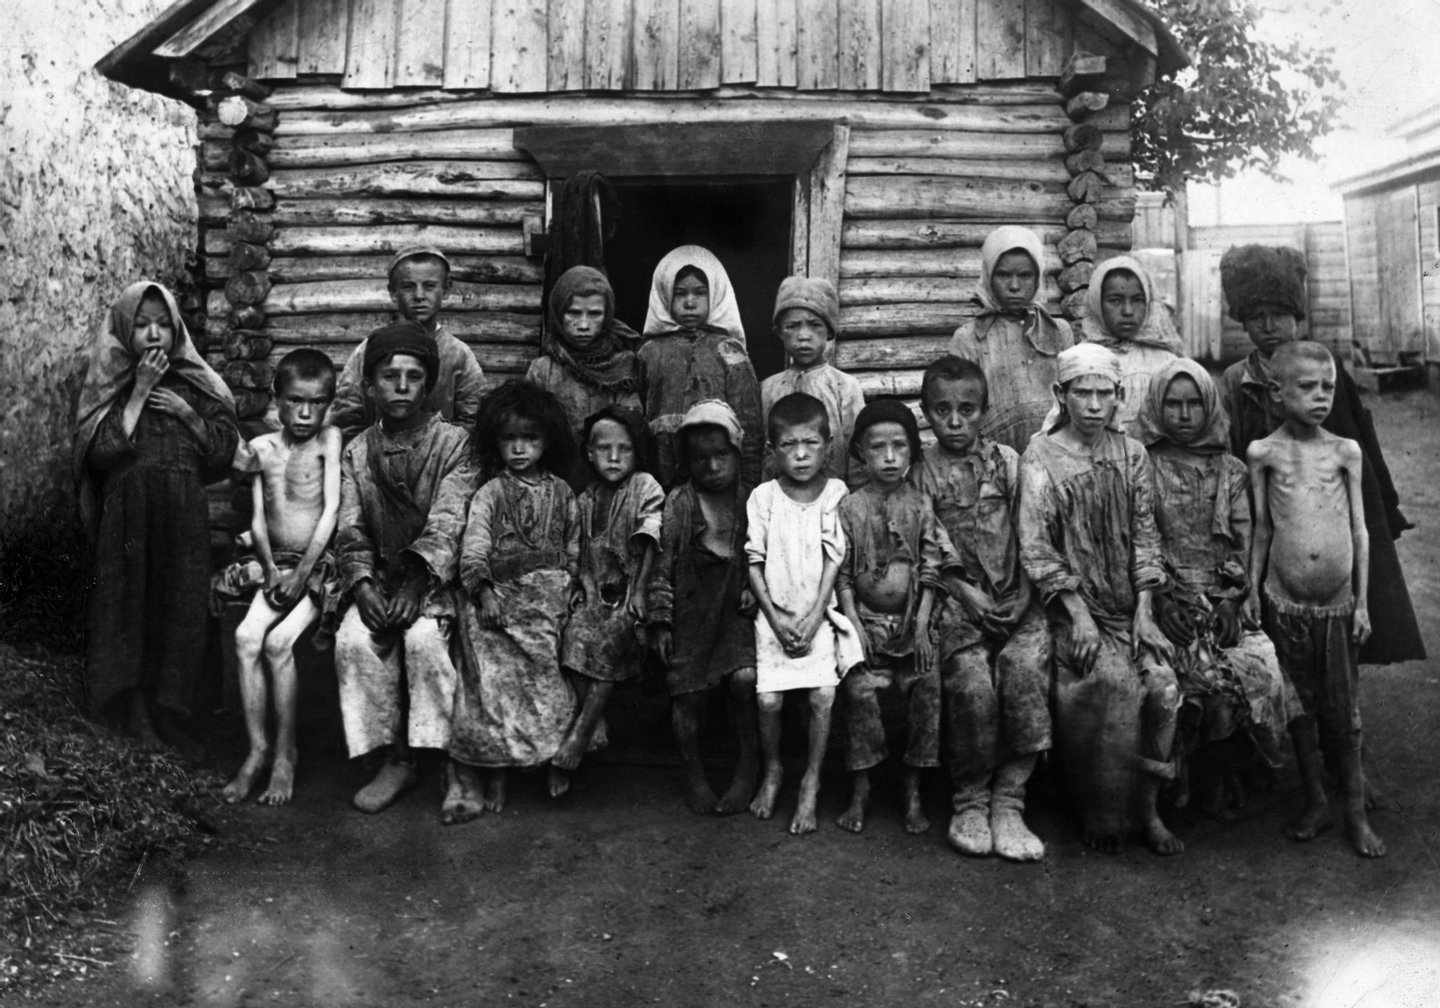 October 1921: Famine-stricken refugee children in Russia during the Russian Civil War. (Photo by Topical Press Agency/Getty Images)